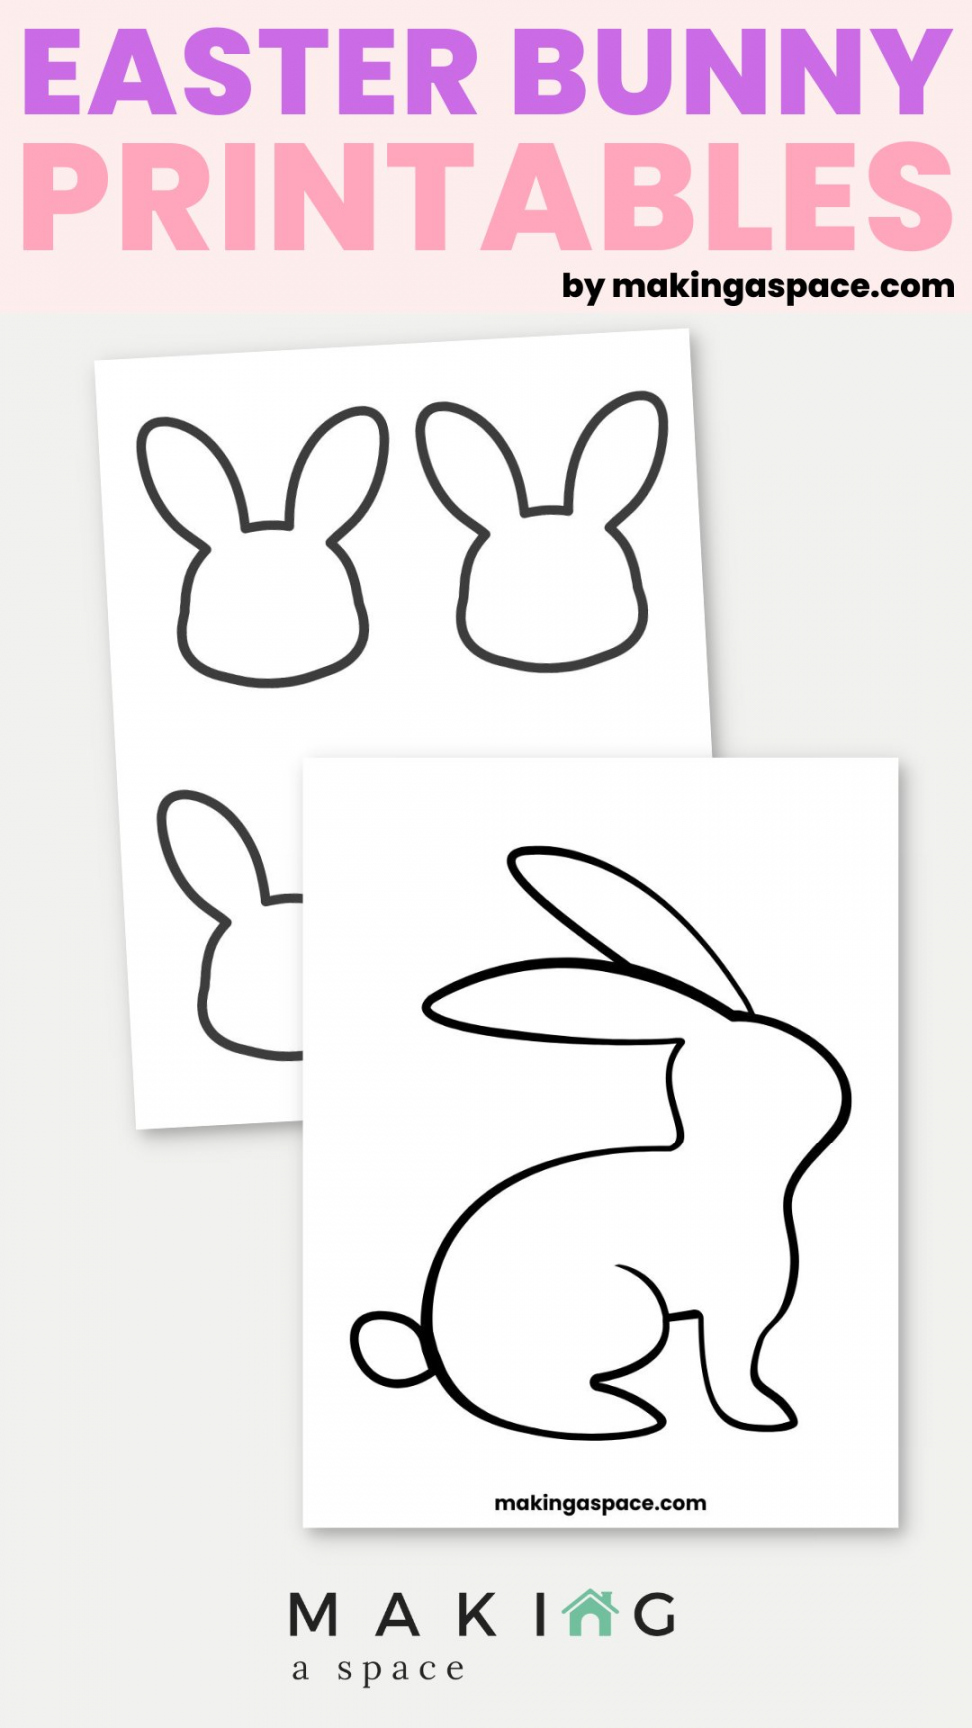 Free Printable Easter Bunny Templates - Making A Space